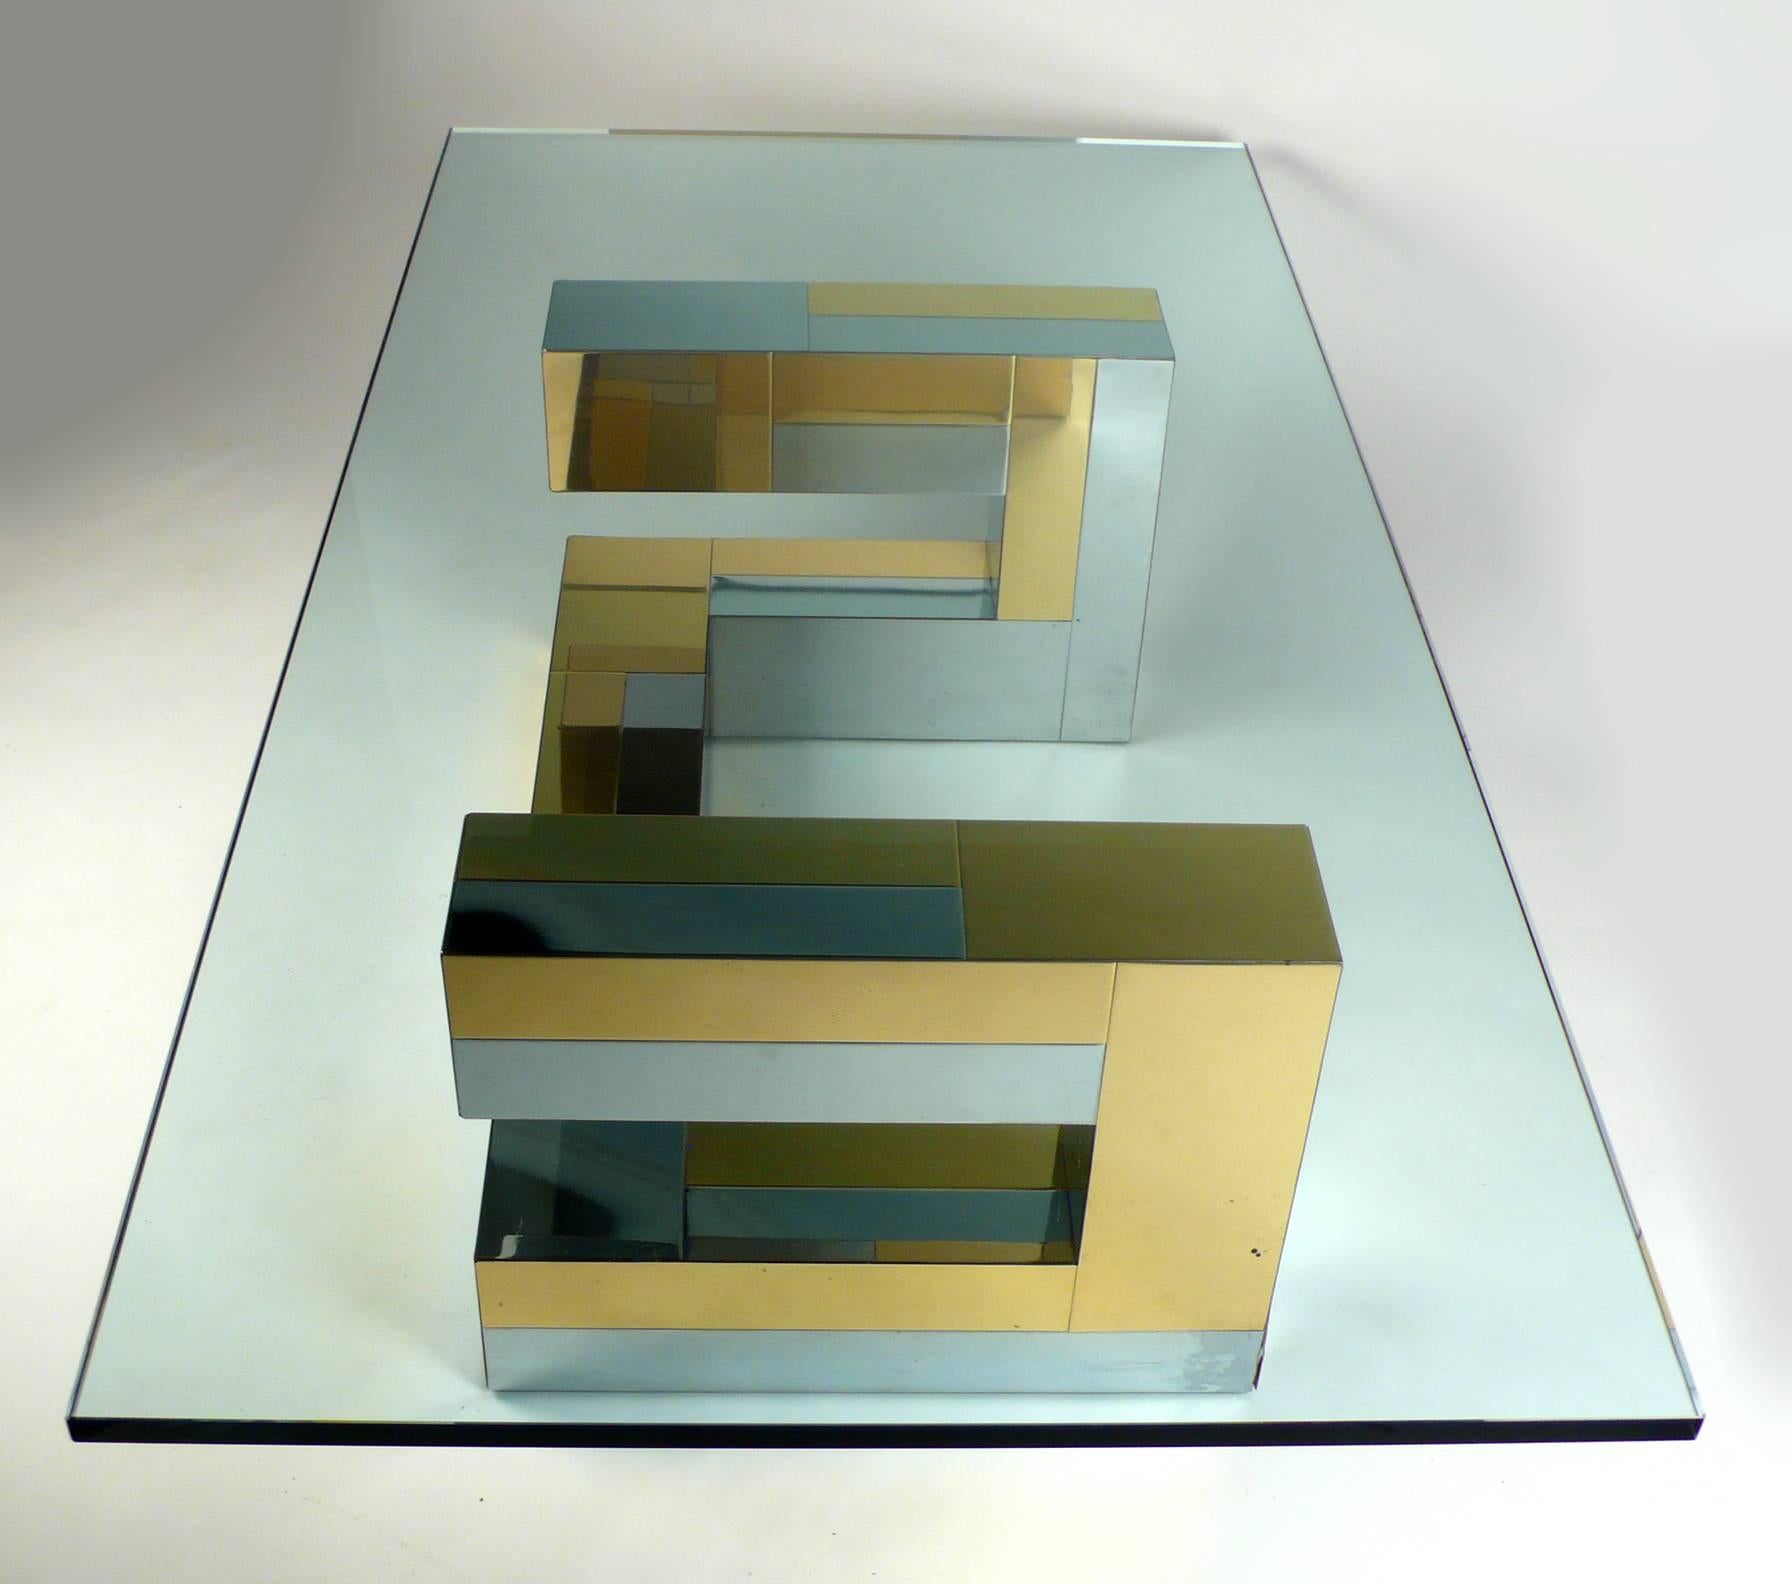 Iconic glass and brass coffee table designed by Paul Evans for Directional. 

Dimensions: base is 34